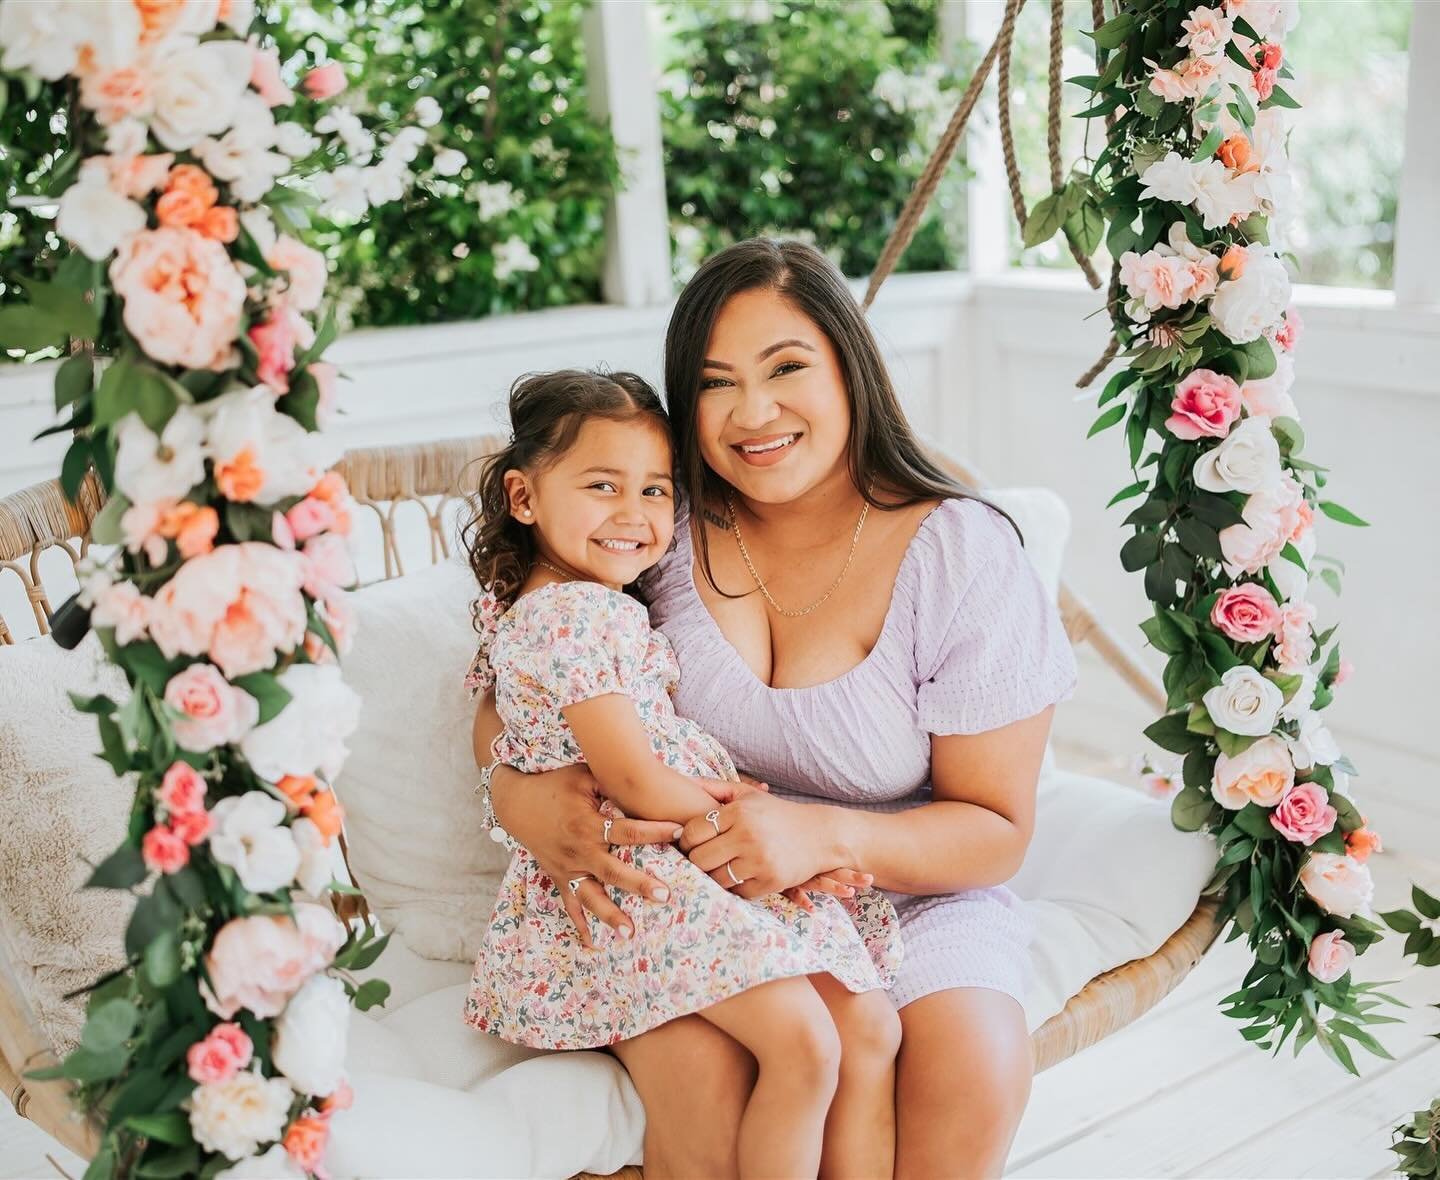 💐 Spring Porch Minis was a so Beautiful
.
.
.
.
.
#kanisphotography #houstonphotographer #houstonphotography #mothersday #houstonmommyandme #mommyandme #mommyandmephotoshoot #mommyandmeminis #motherhoodminis #mommyandmephotos #motherdayphotoshoot #m